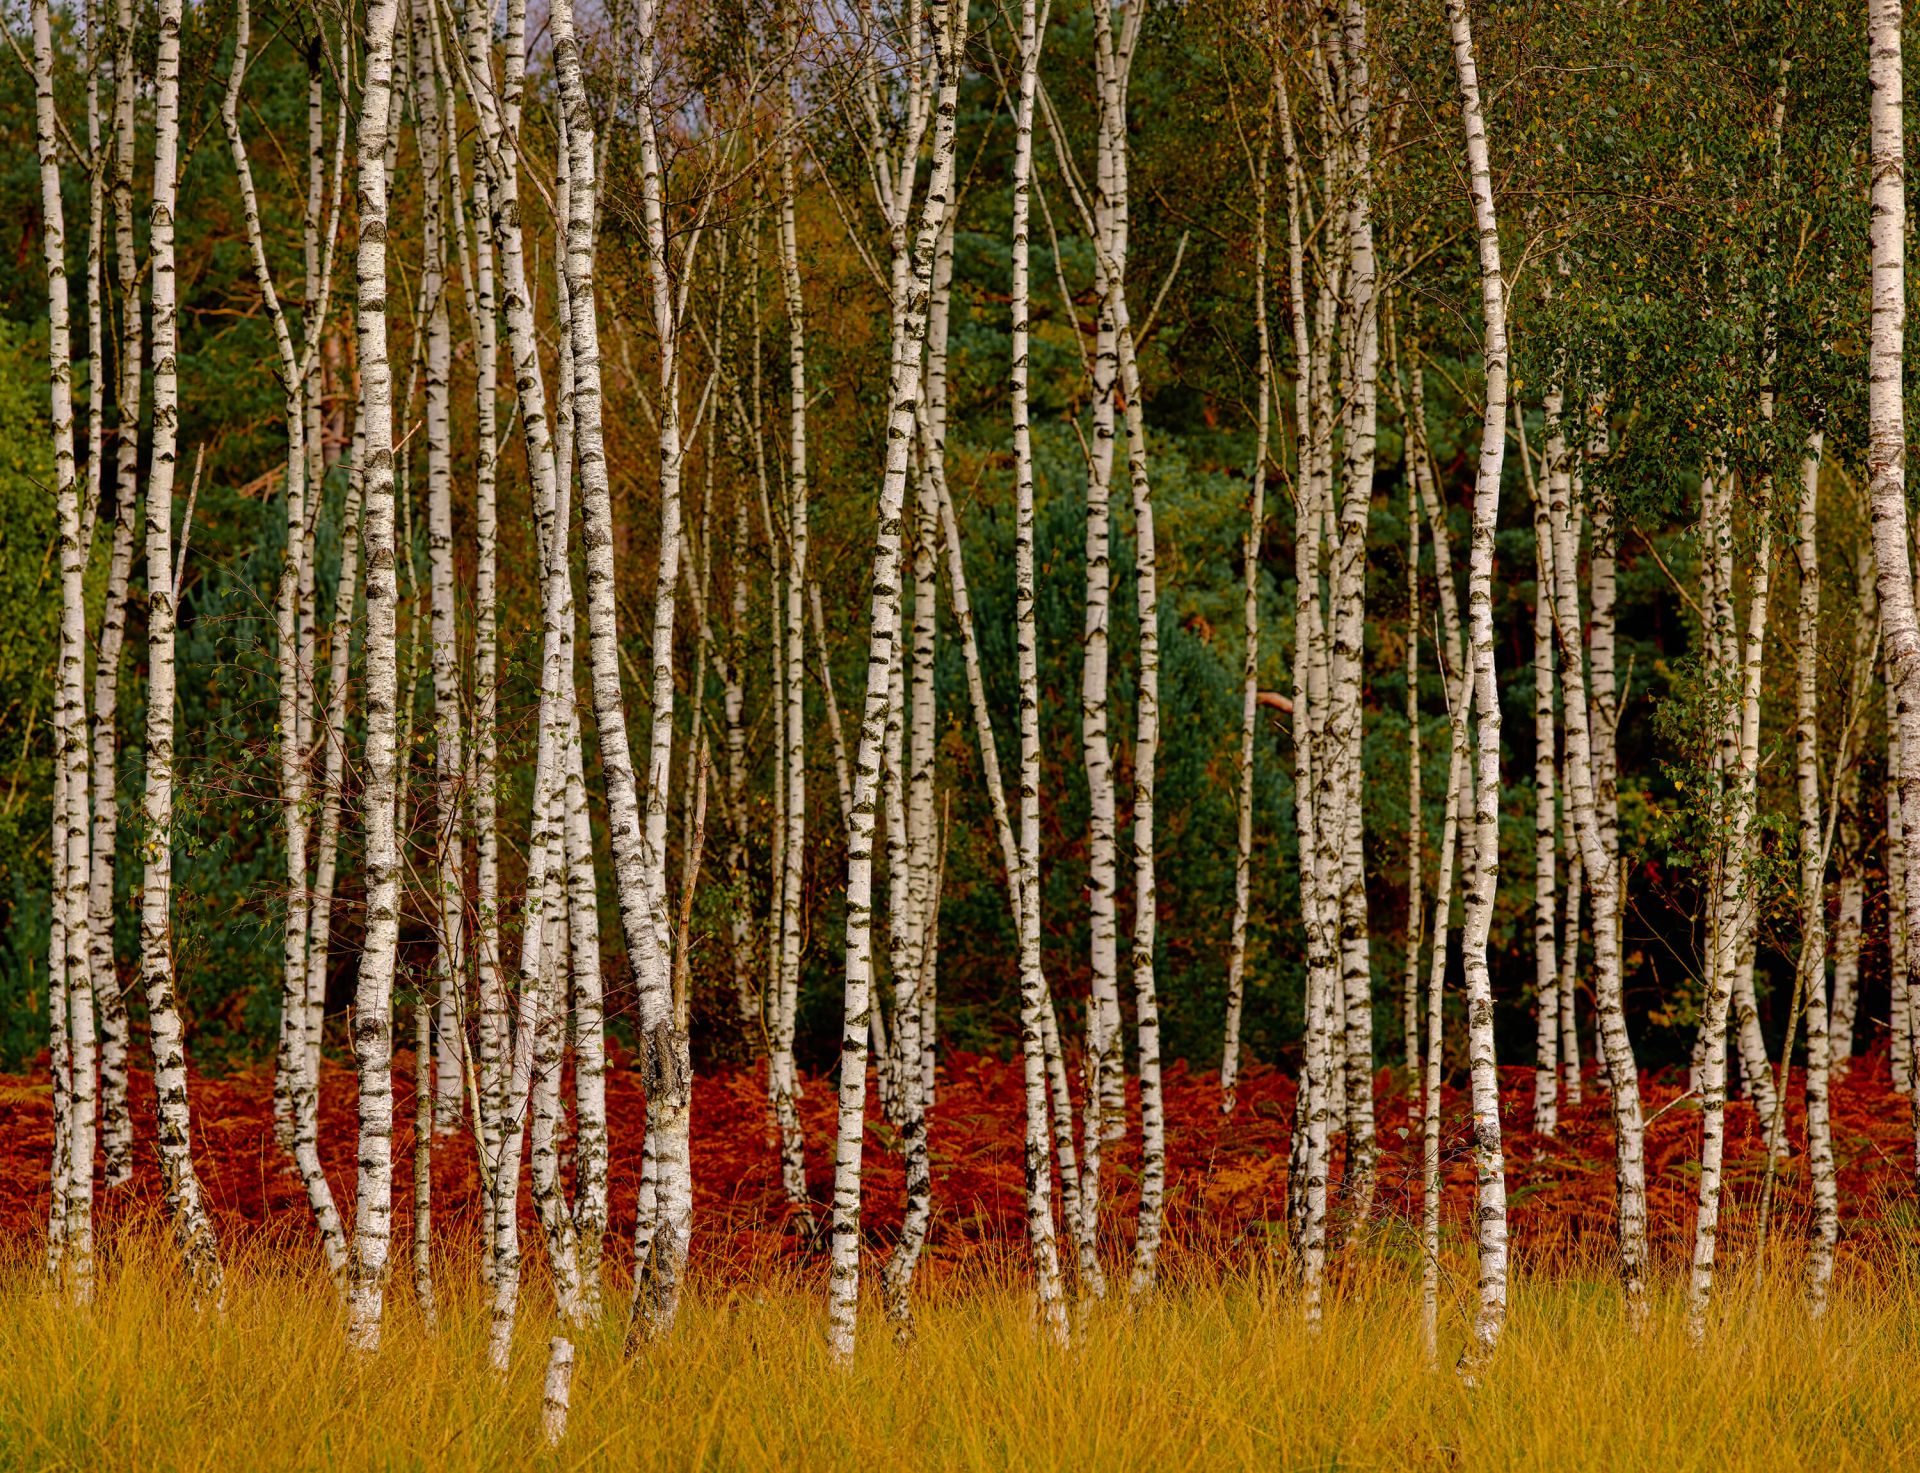 Birch trees at the edge of the forest - Wallpaper